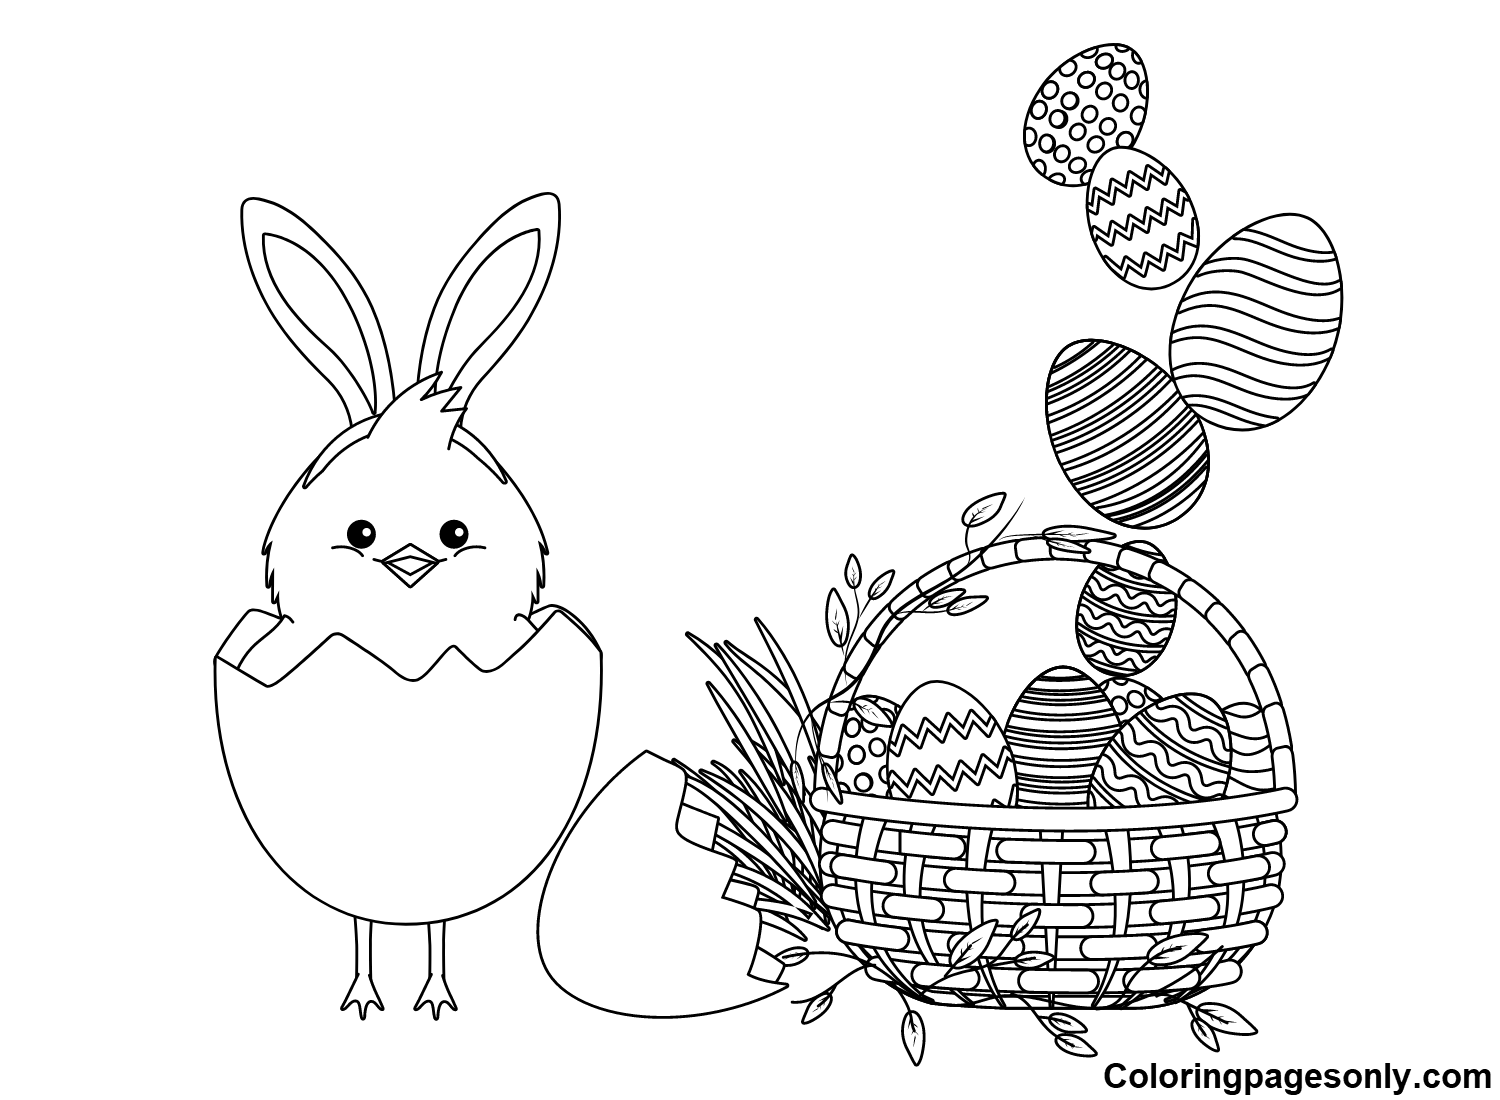 Printable Easter Chick from Chick